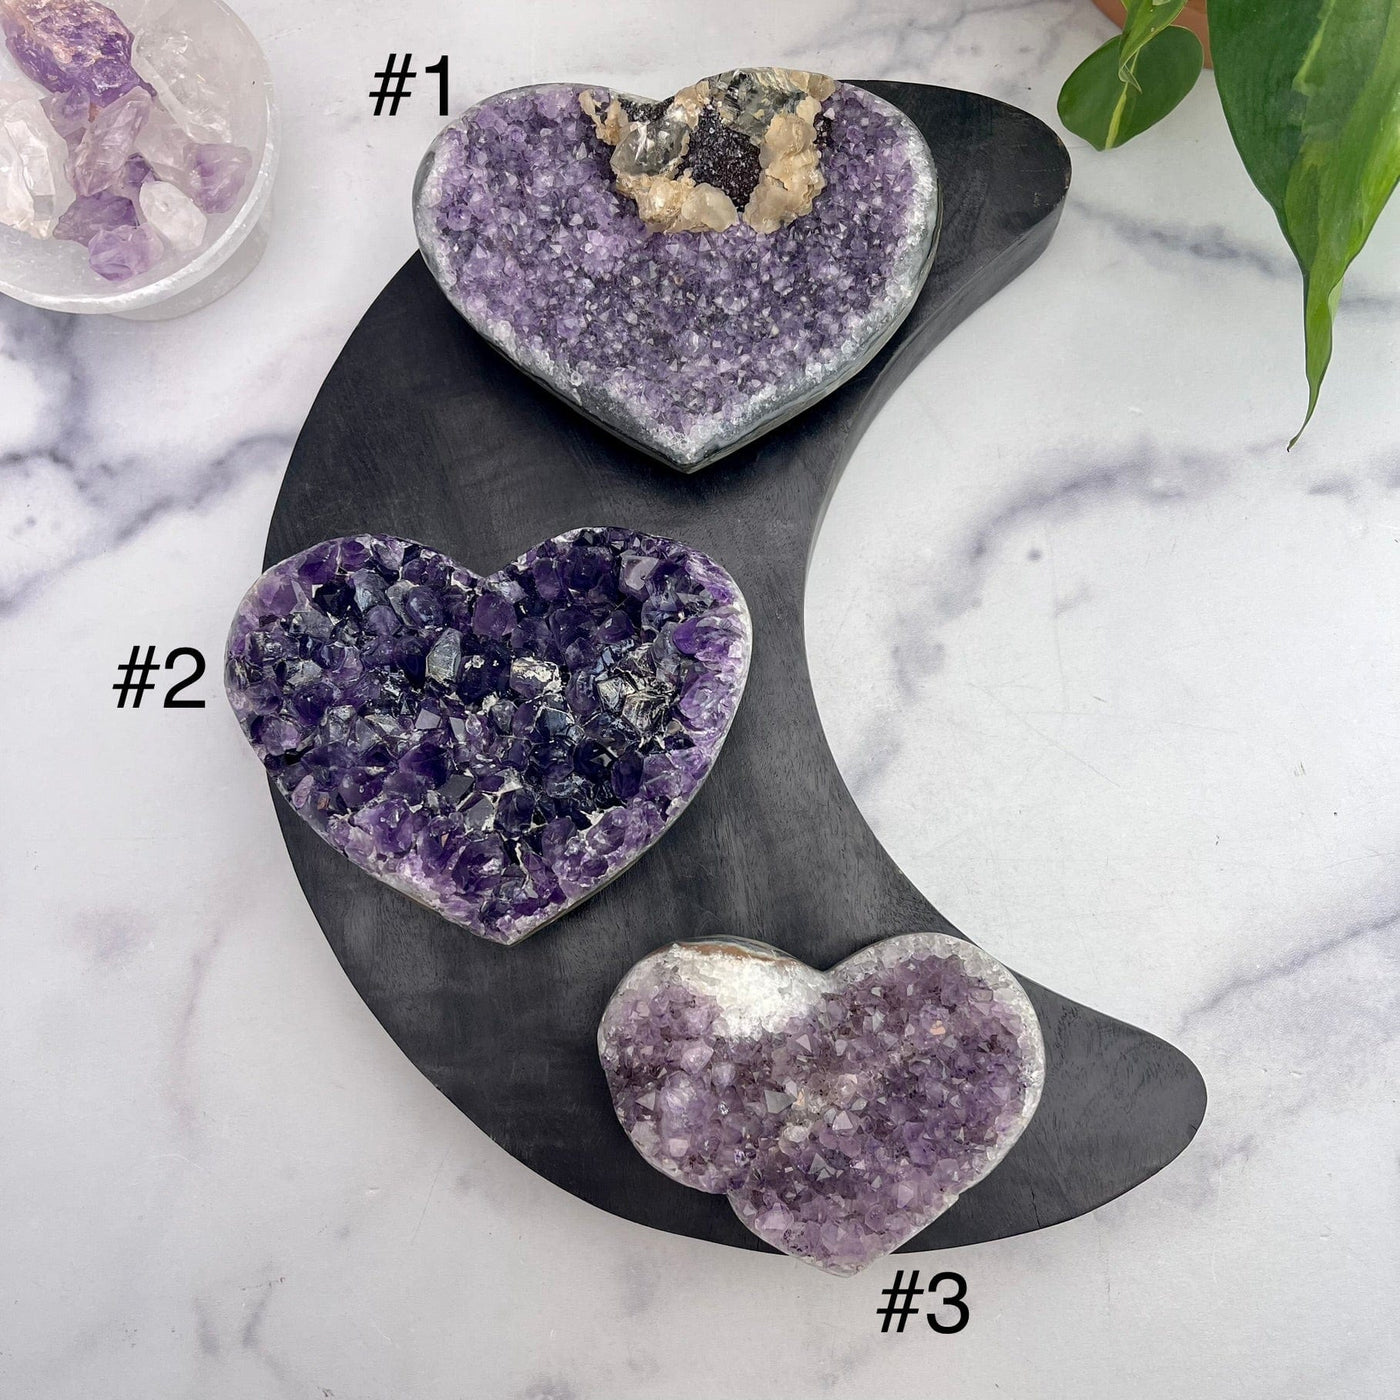 Druzy Purple Cluster Amethyst Hearts Top View Of Three Choices